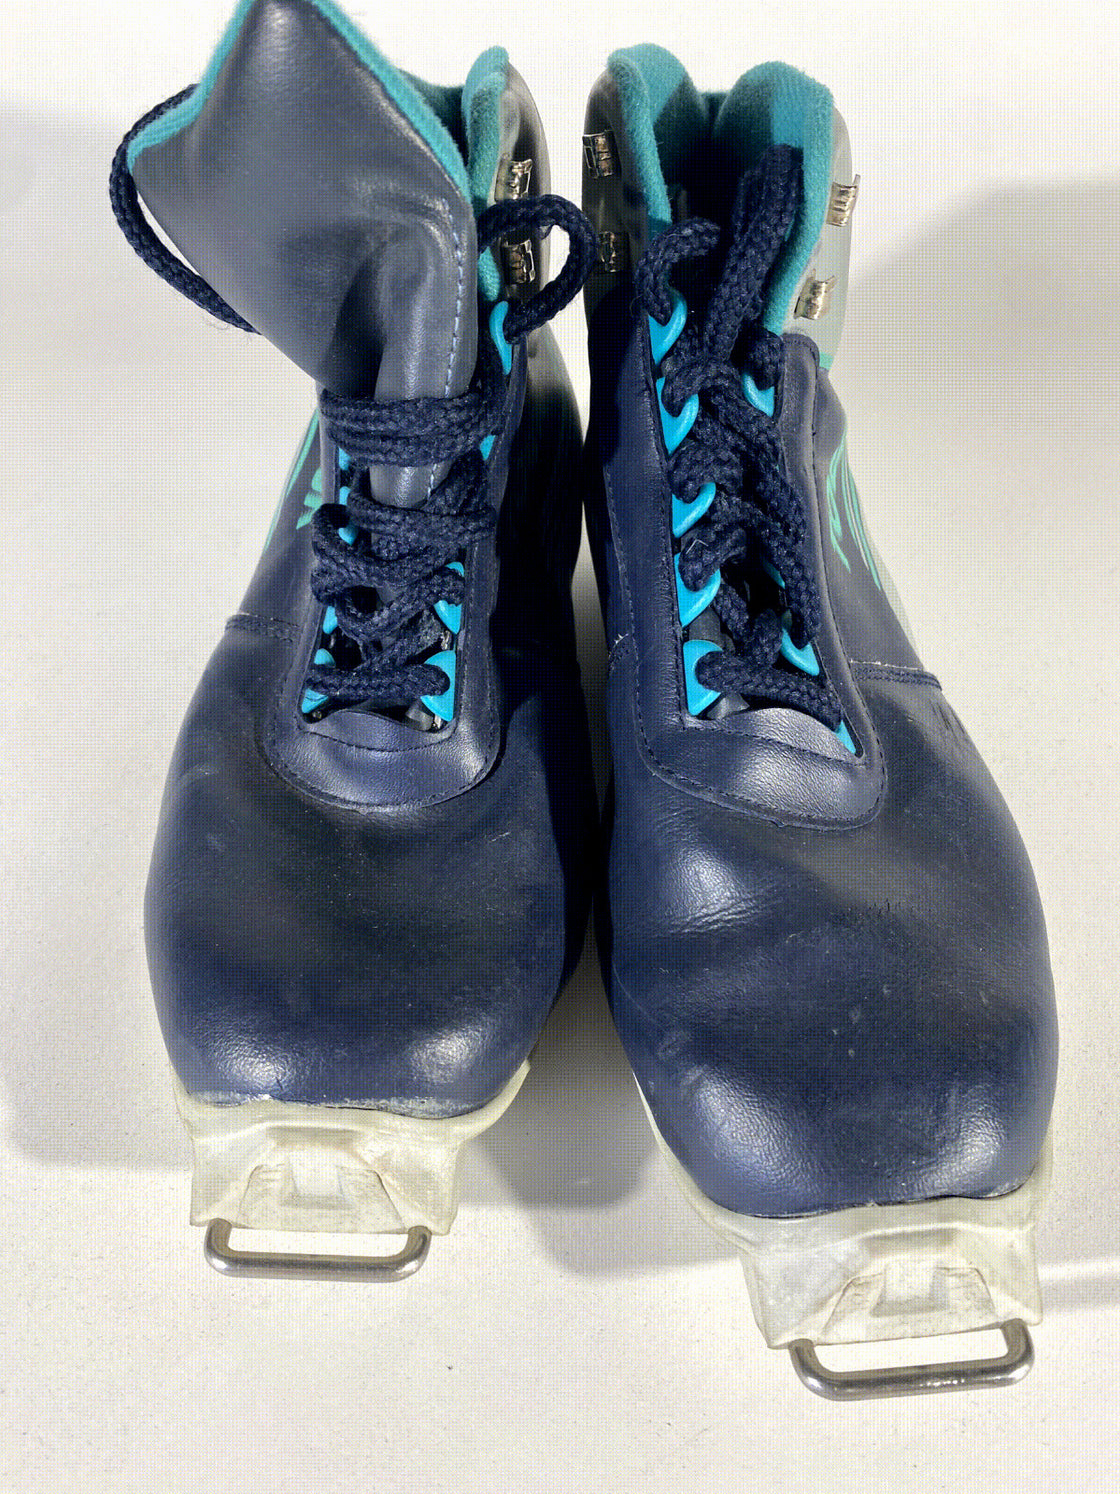 Tour Vintage Nordic Cross Country Ski Boots Size EU39 US7 SNS Old Bindings